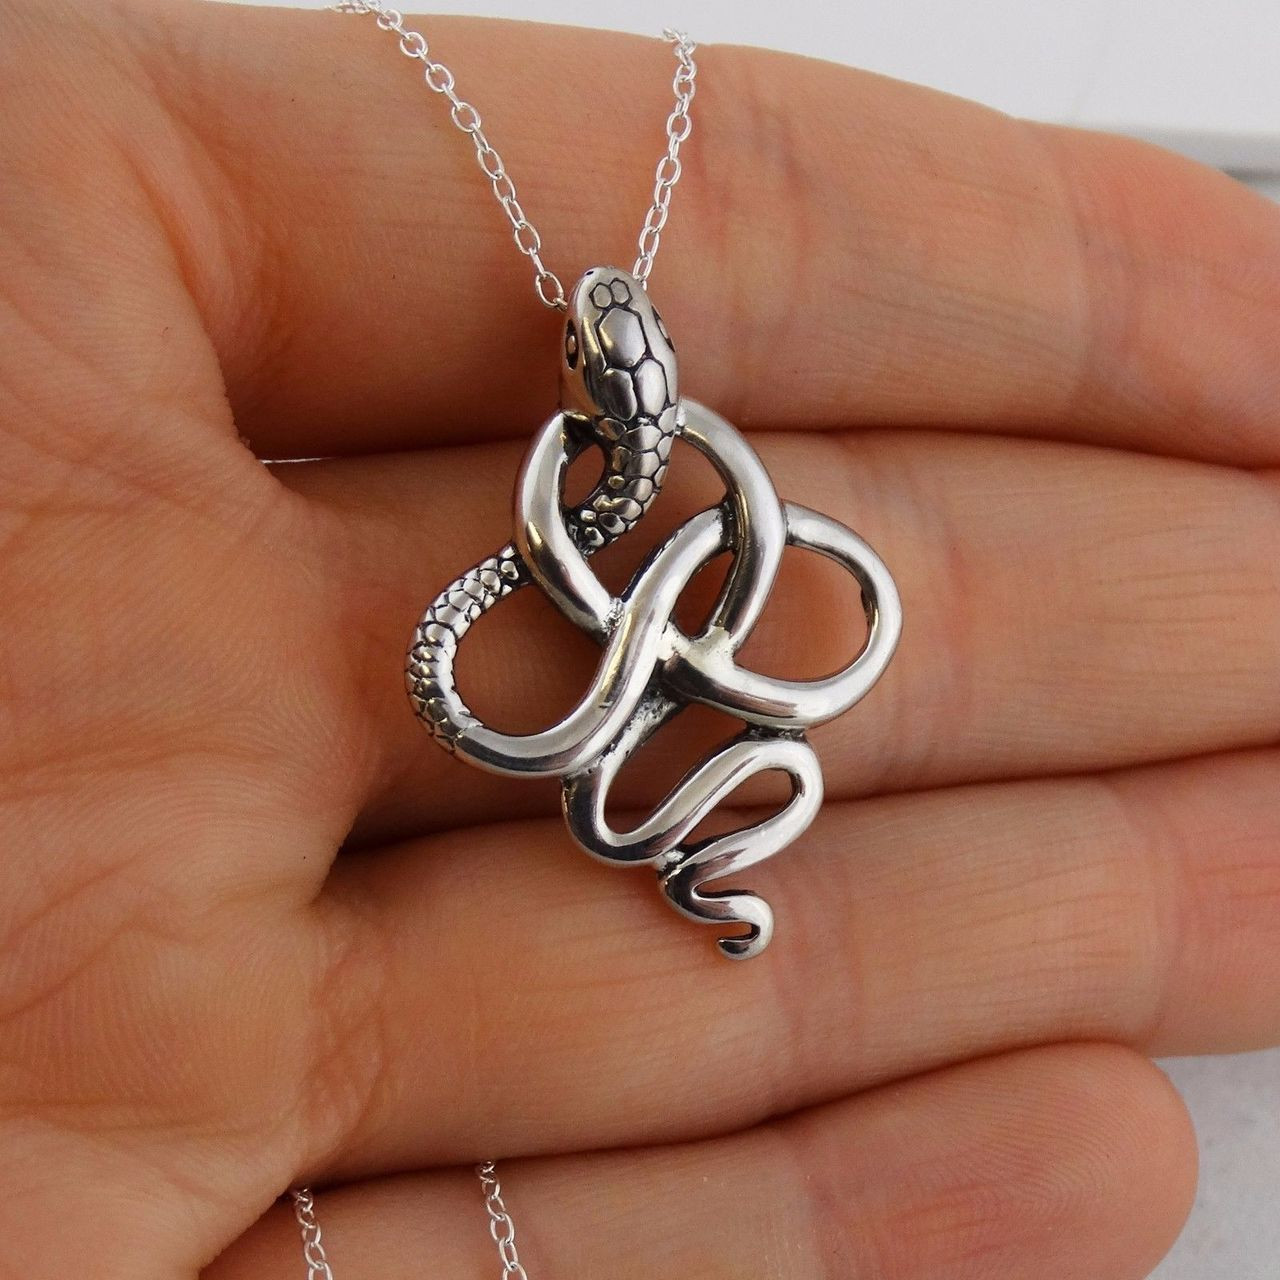 Silver Celtic Spiral Knot Necklace and Sterling Silver Chain